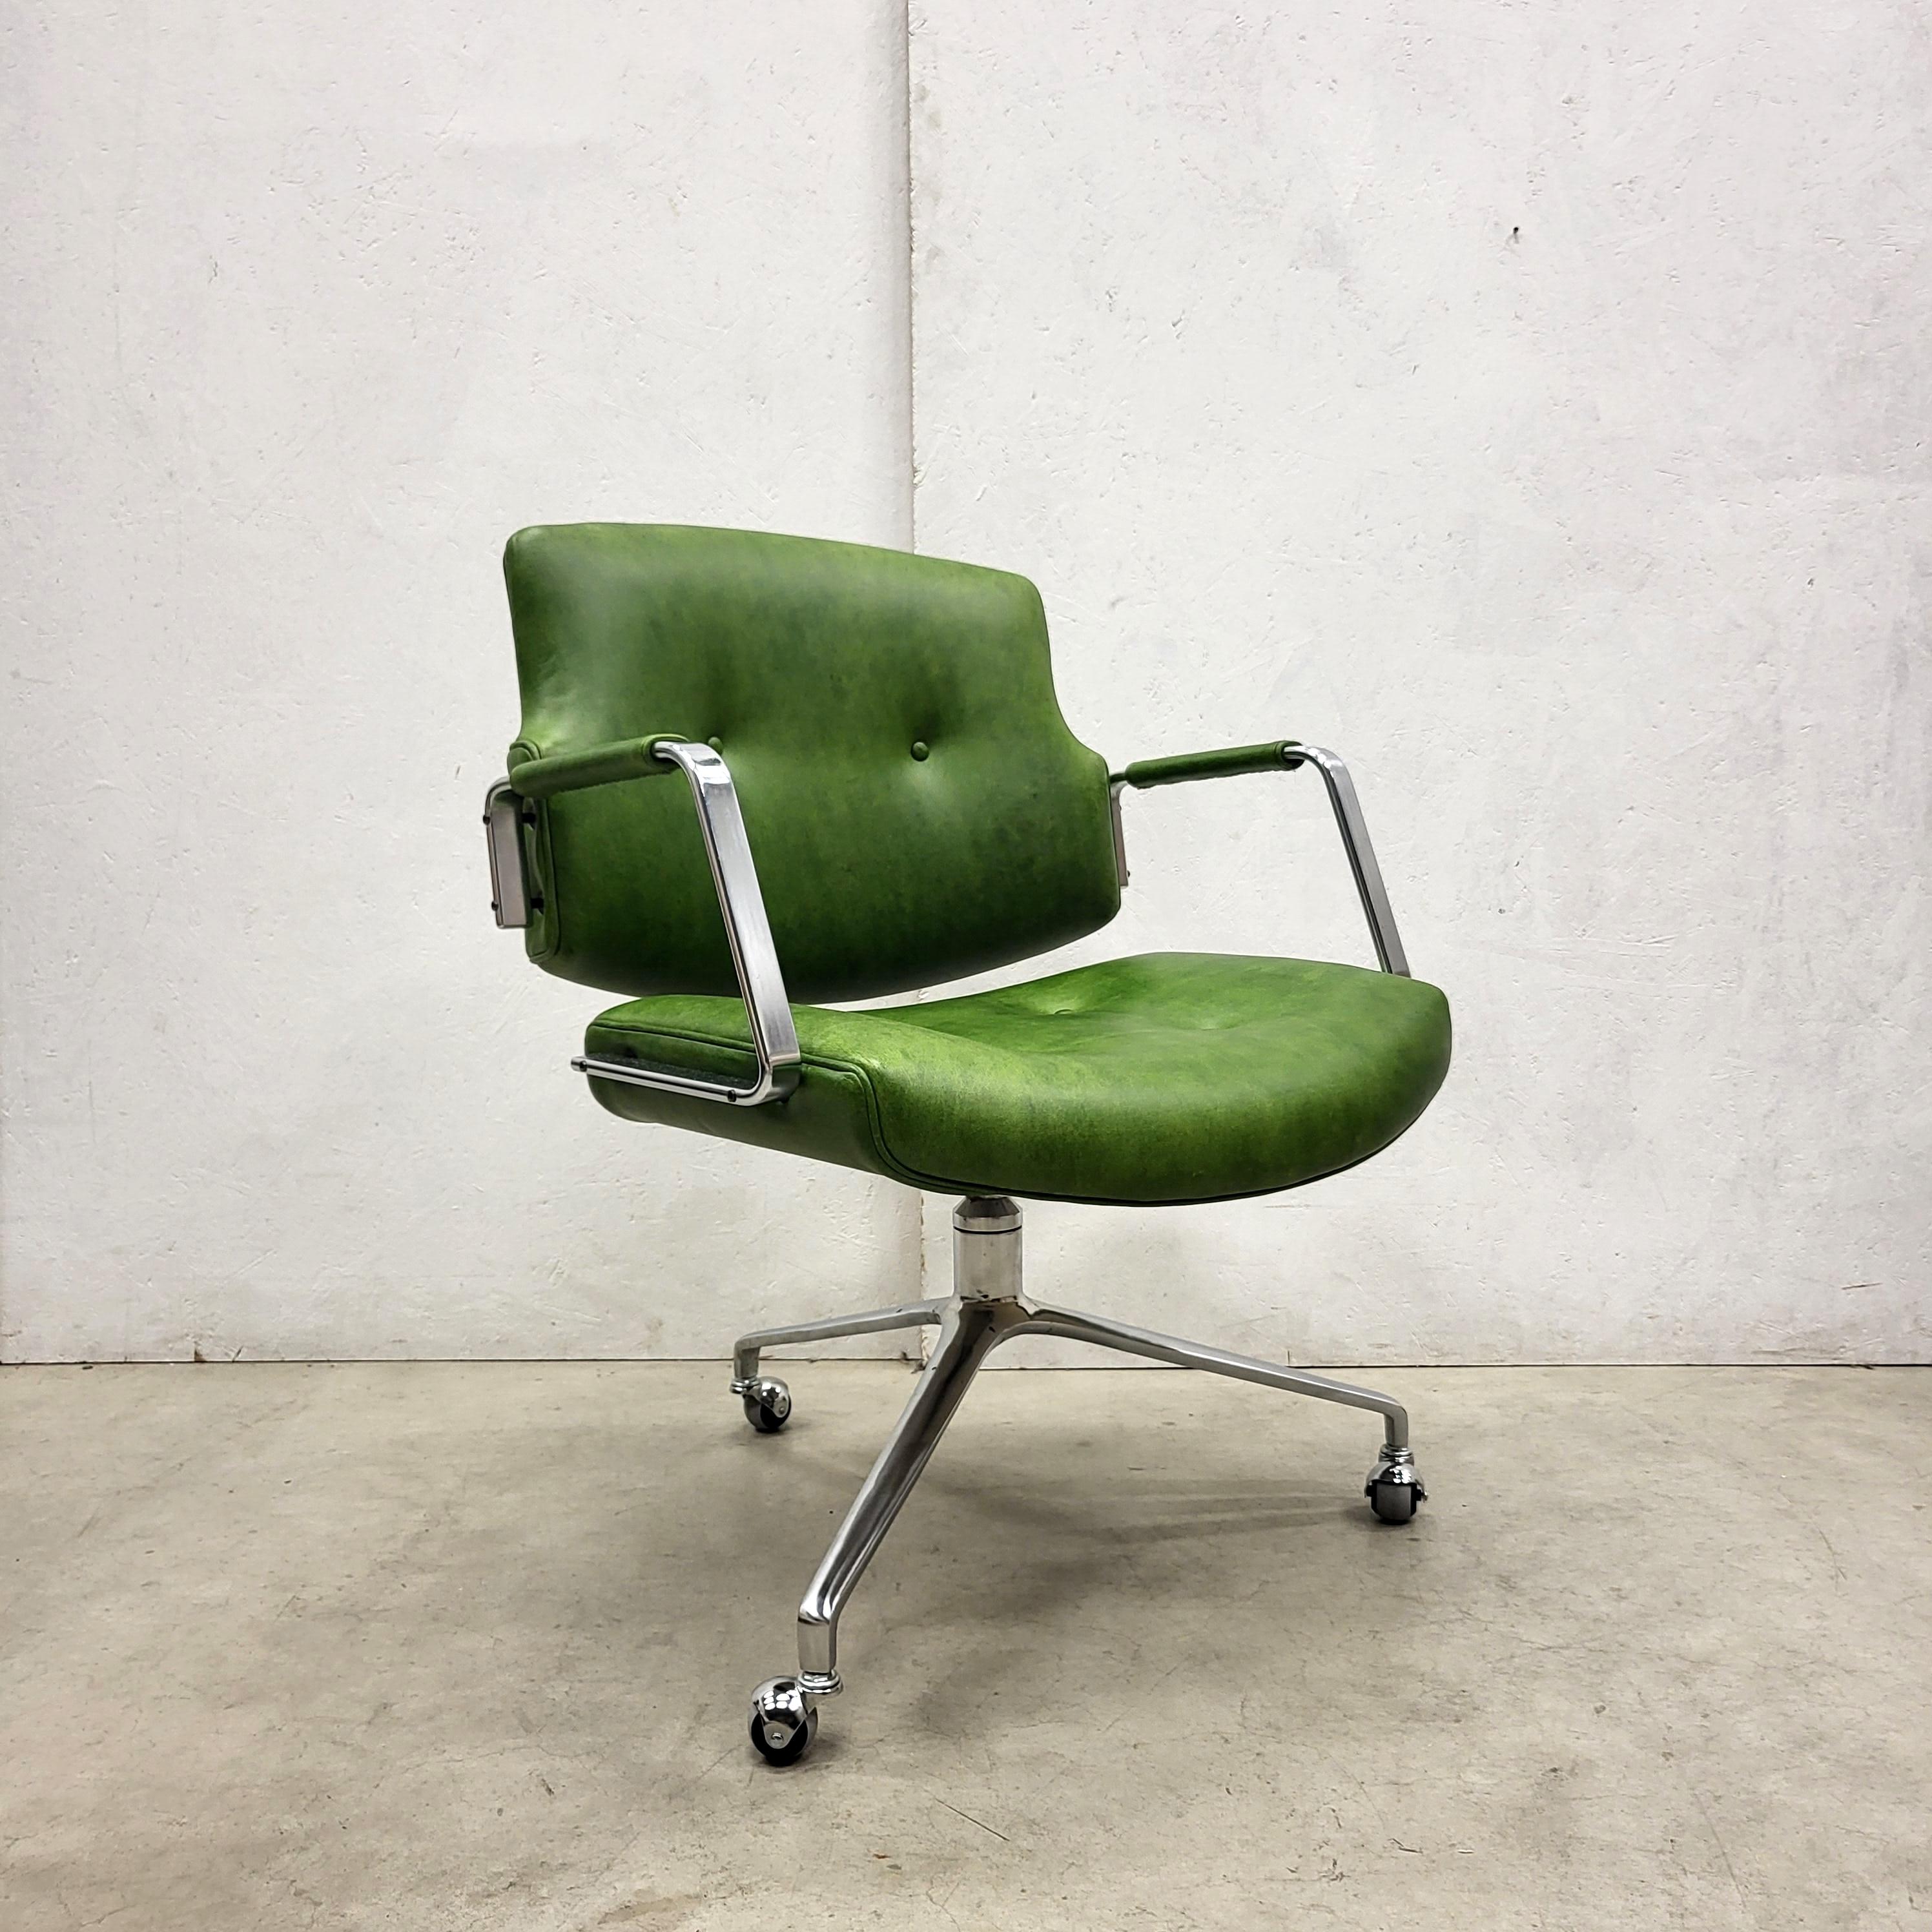 Rare Green FK84 desk chair by Jorgen Kastholm & Preben Fabricius.
The chair was manufactured by Alfred Kill International in Germany in the end of the 60s.

The chair features an amazing green leather upholstery on a tripod base of chromed